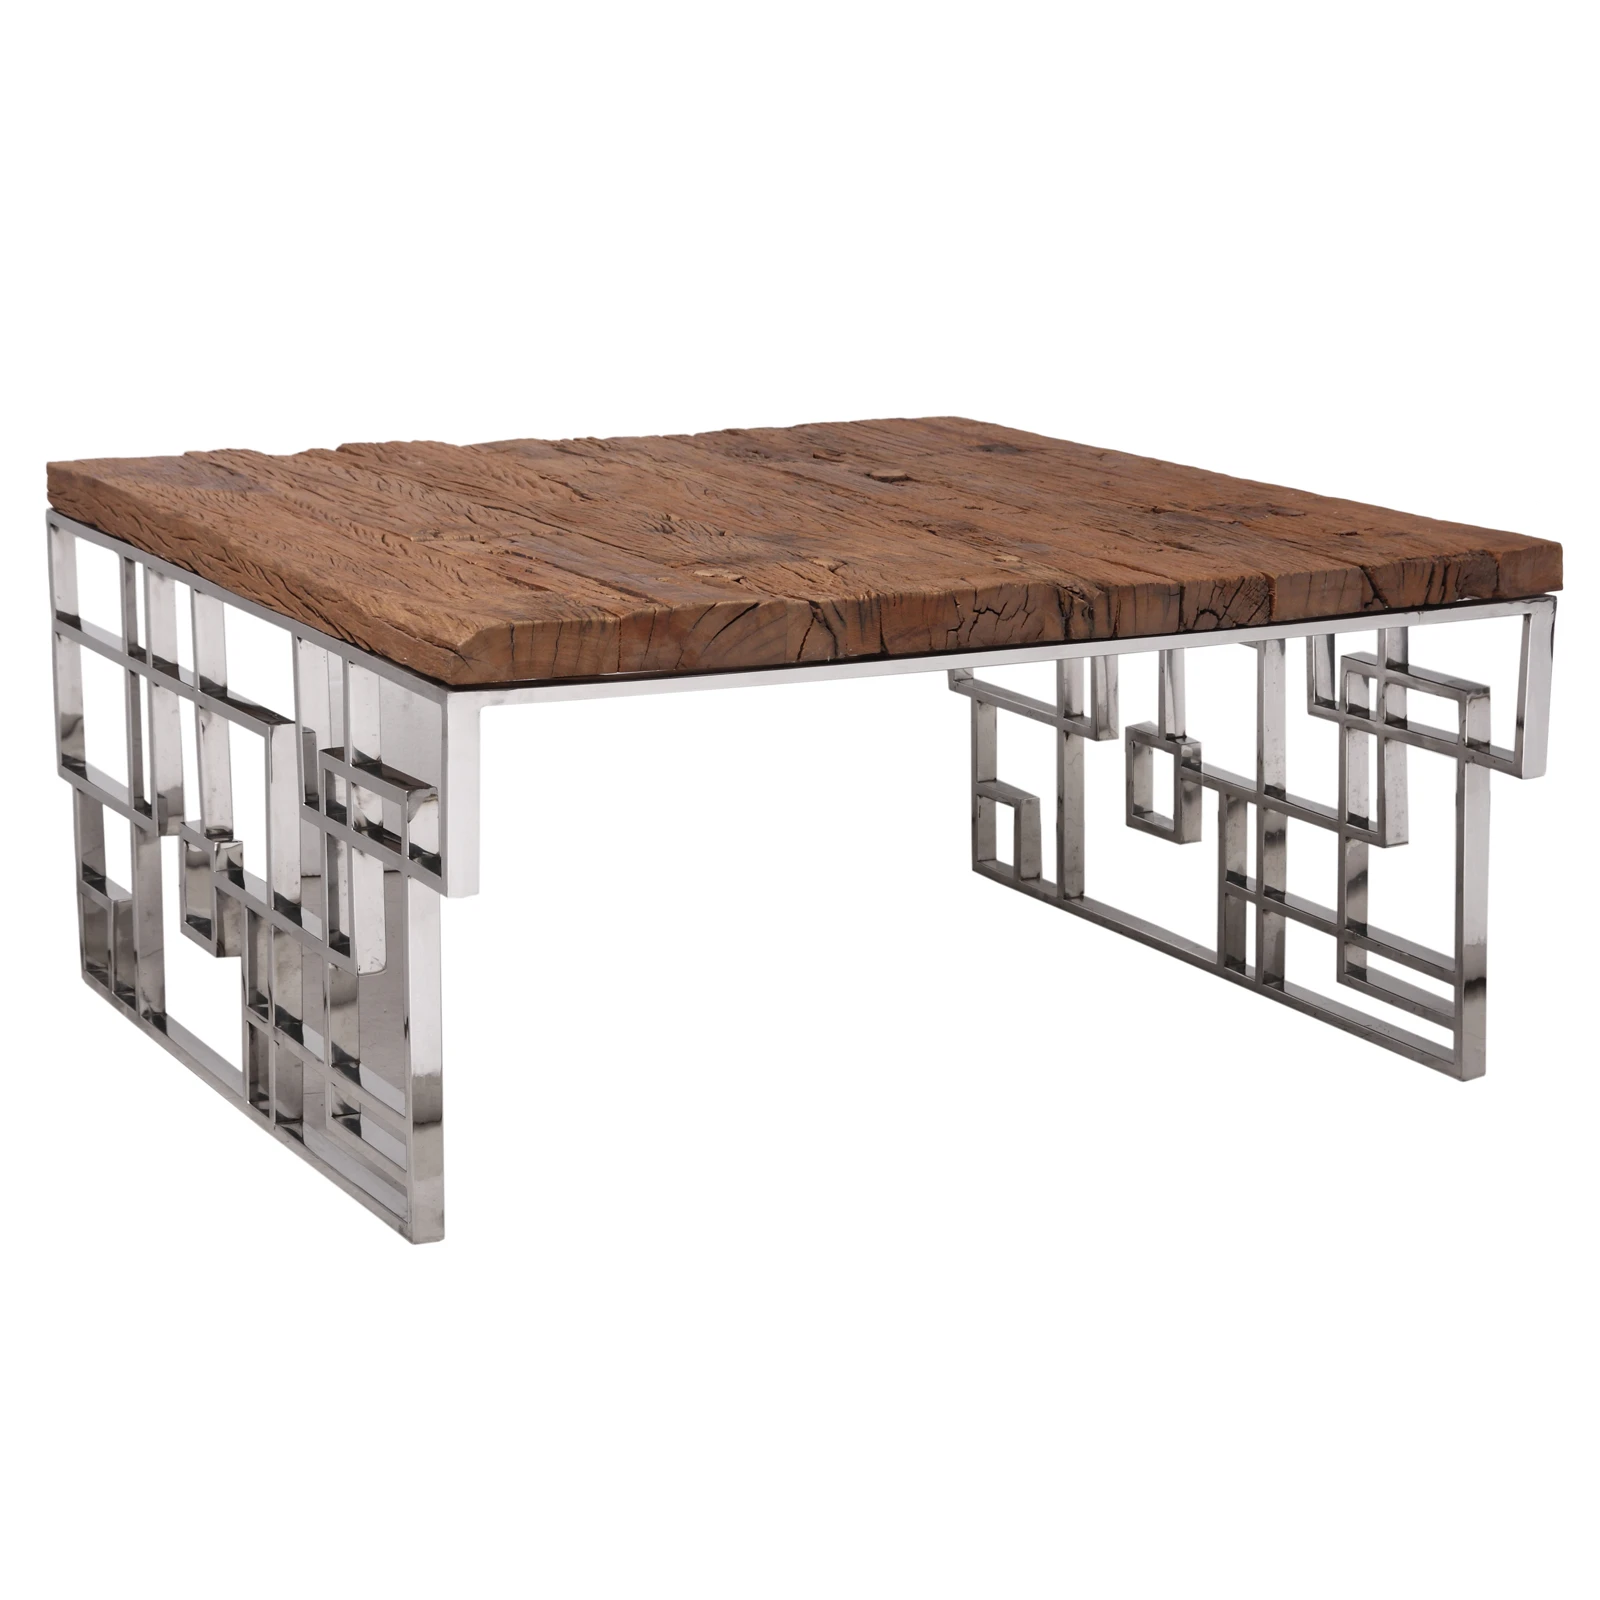 high quality modern industrial solid sleeper Wooden Top and Maze Style Stainless Steel Legs Coffee Table dining table end table